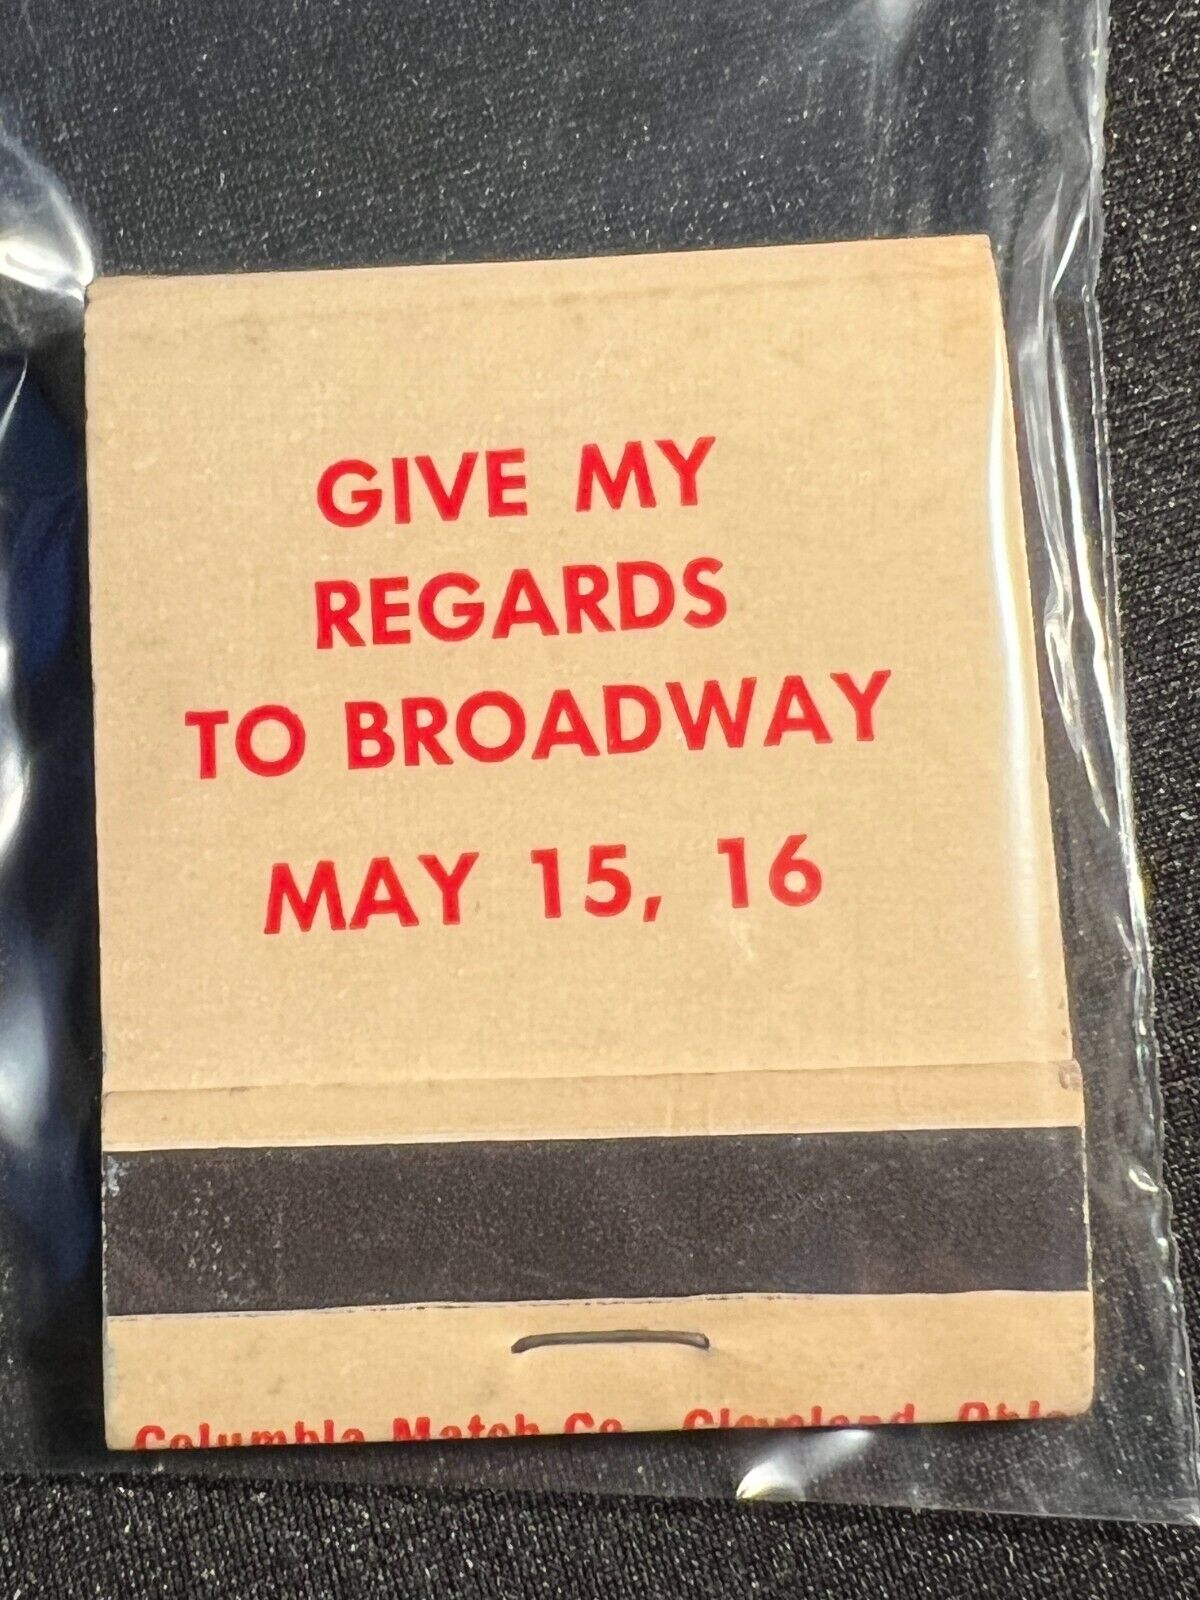 VINTAGE MATCHBOOK - GIVE MY REGARDS TO BROADWAY - MAY 15, 16 - UNSTRUCK BEAUTY